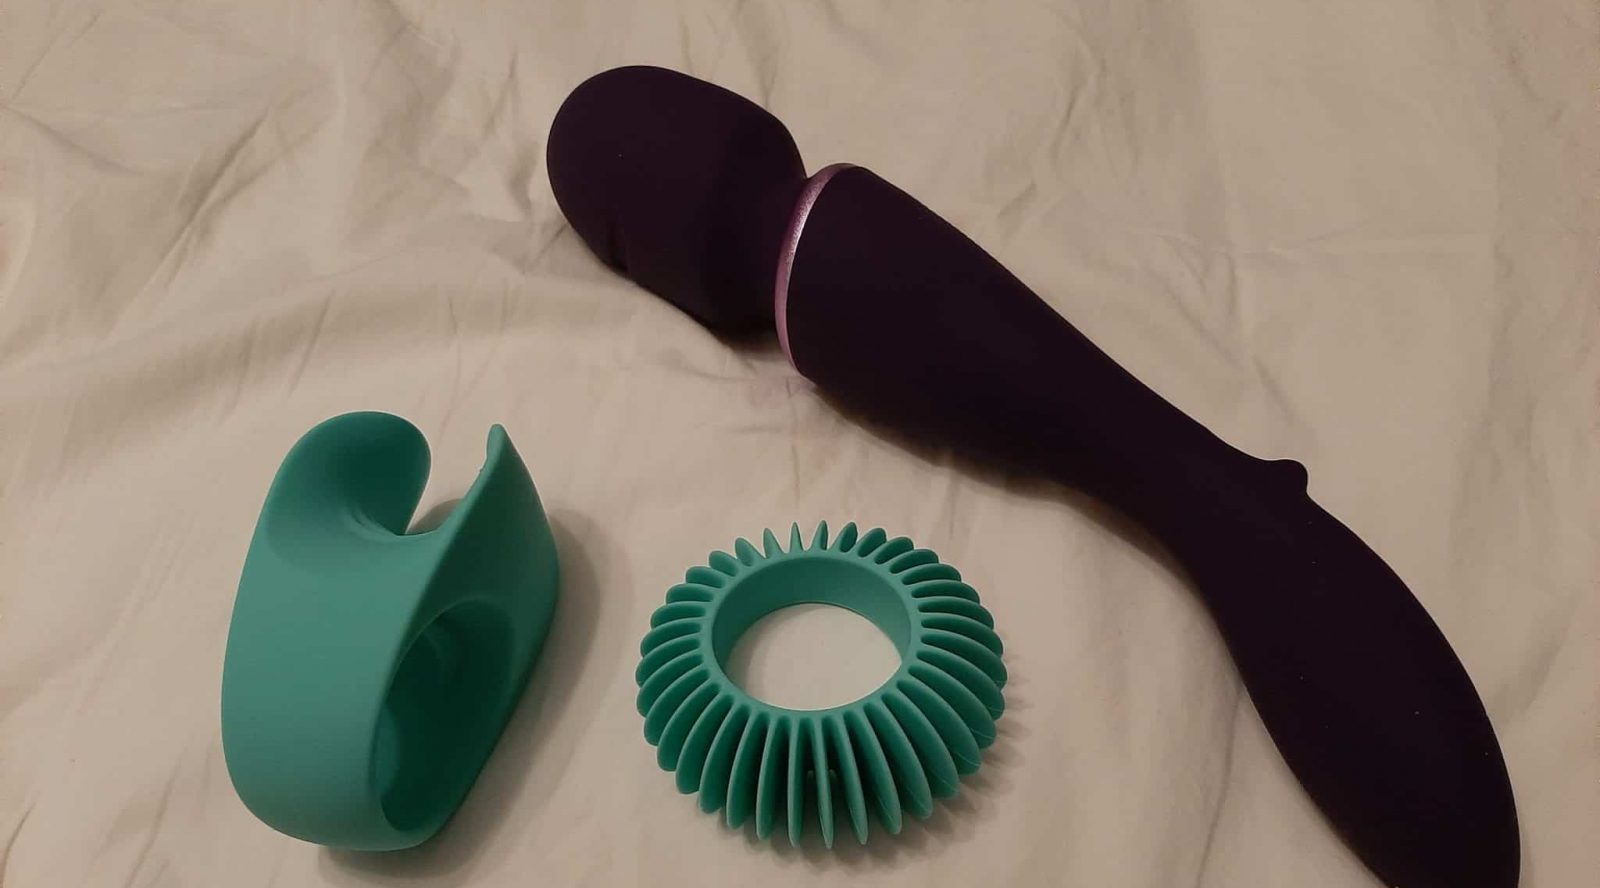 We-Vibe Wand + Attachments